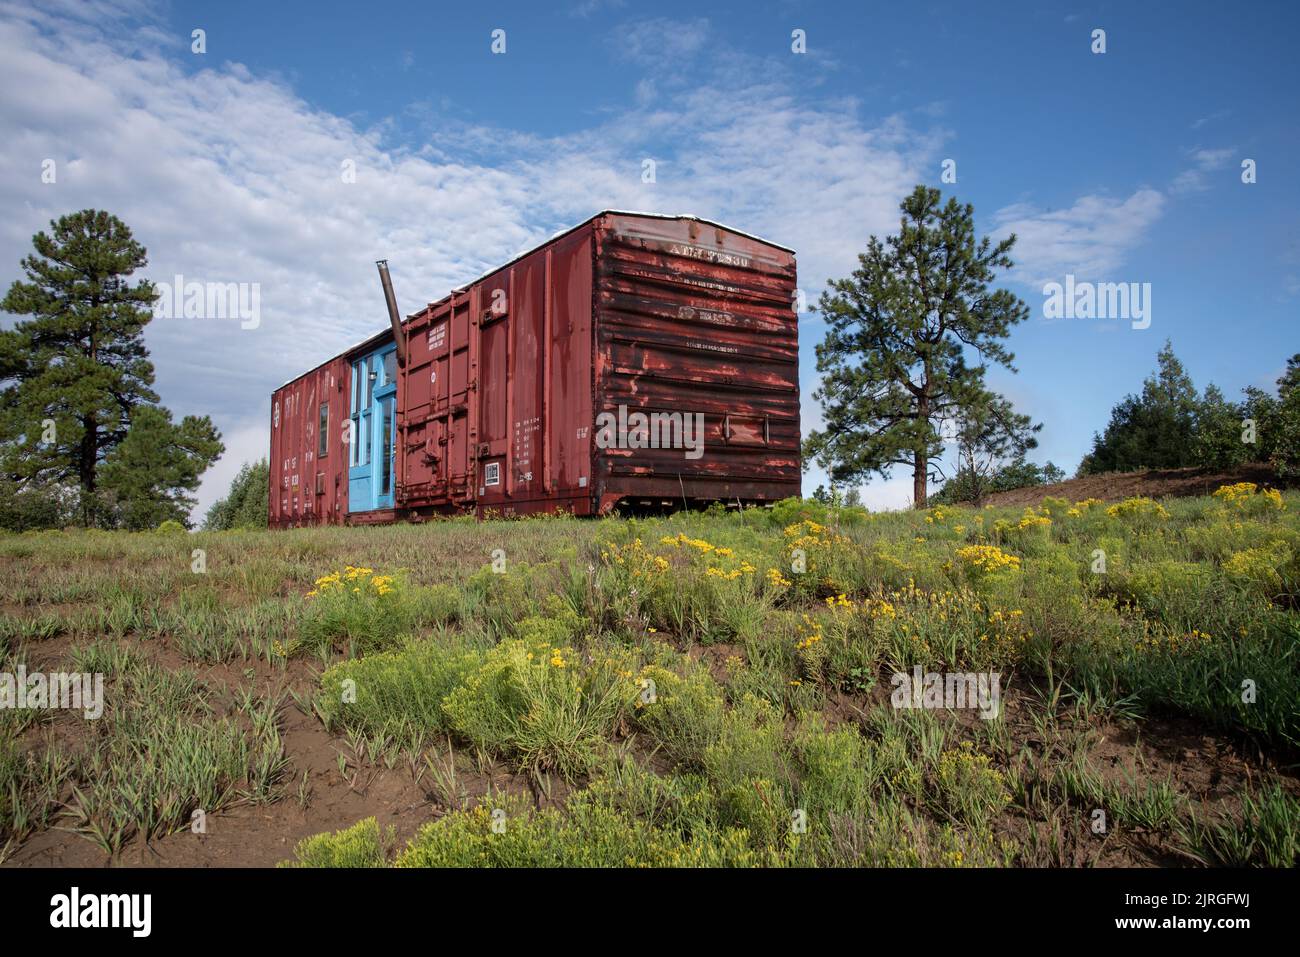 Dark red repurposed train car with turquoise blue doors in Northern New Mexico, Rio Arriba County, New Mexico, USA. Stock Photo